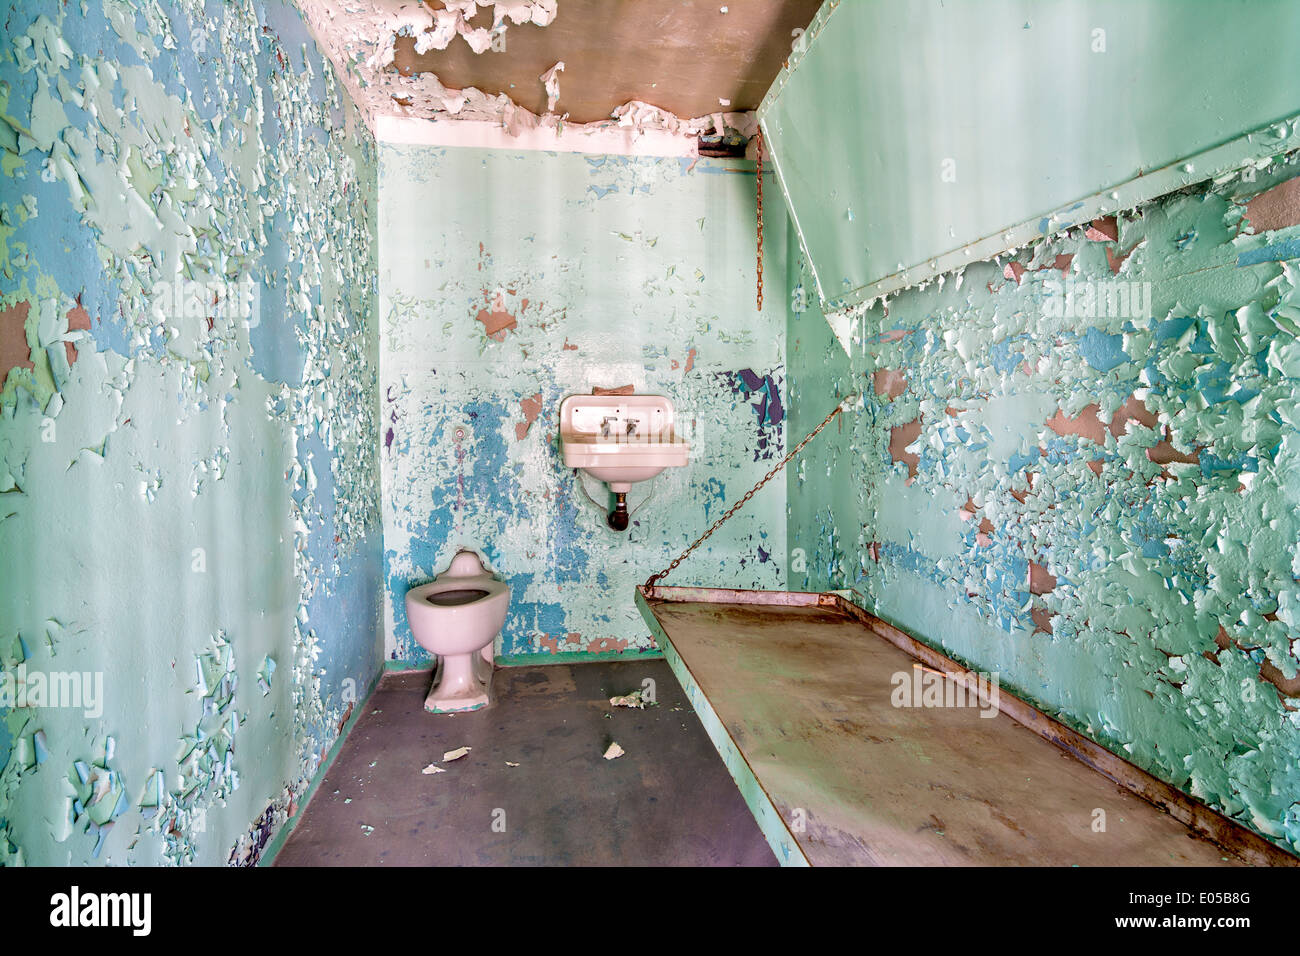 Old Prison cell with pealing paint on the walls Stock Photo